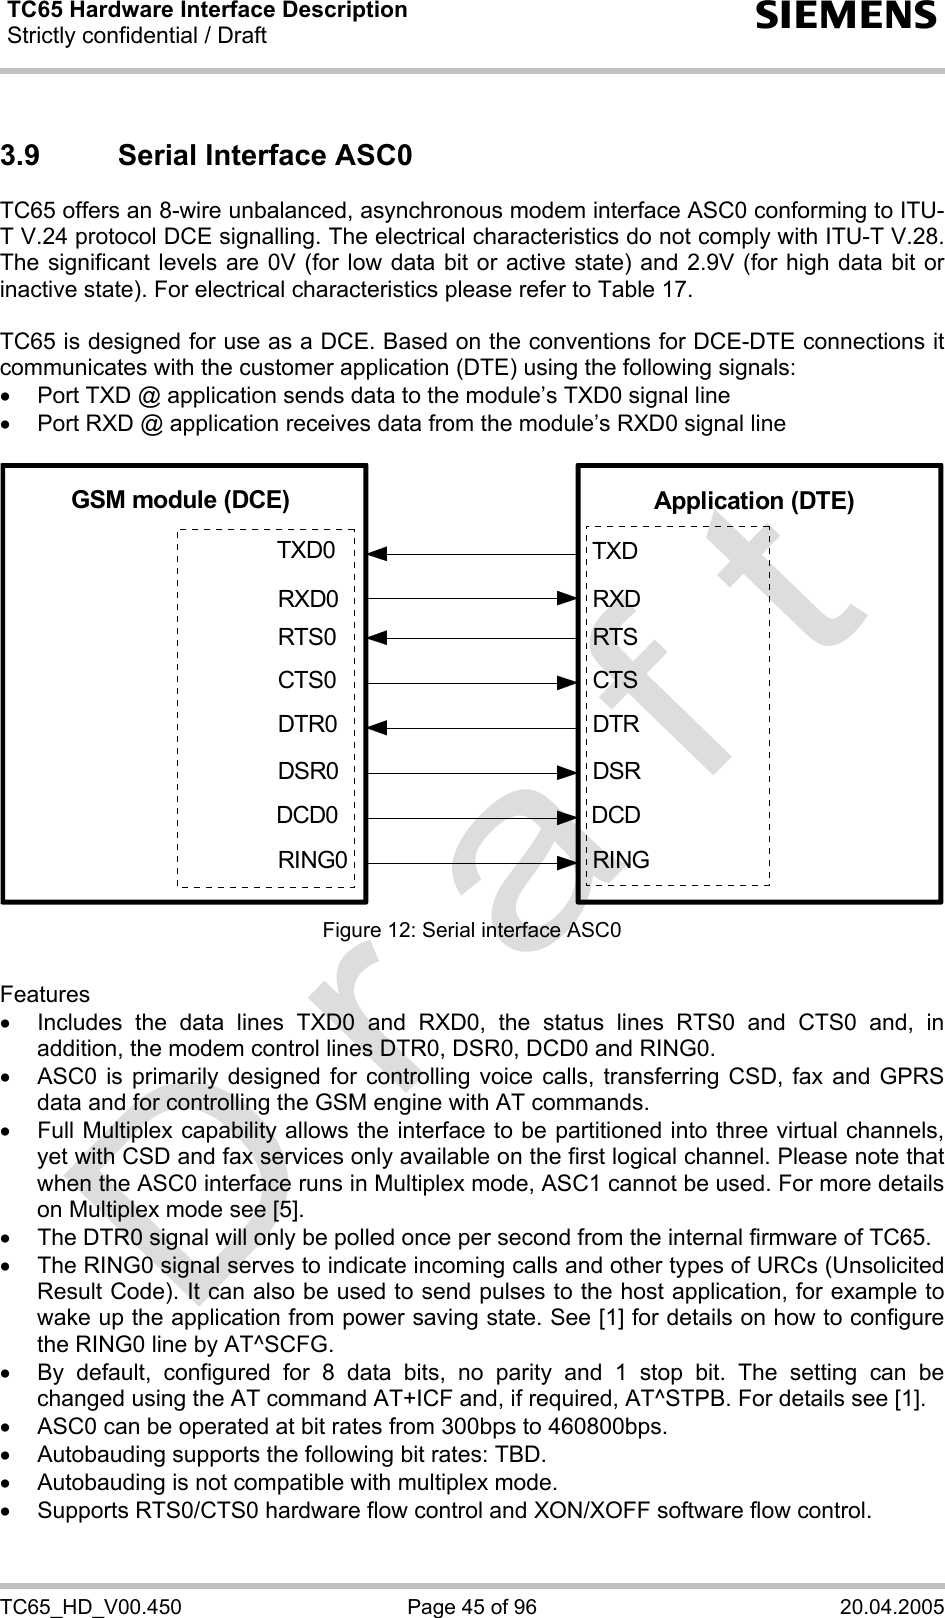 TC65 Hardware Interface Description Strictly confidential / Draft  s TC65_HD_V00.450  Page 45 of 96  20.04.2005 3.9  Serial Interface ASC0 TC65 offers an 8-wire unbalanced, asynchronous modem interface ASC0 conforming to ITU-T V.24 protocol DCE signalling. The electrical characteristics do not comply with ITU-T V.28. The significant levels are 0V (for low data bit or active state) and 2.9V (for high data bit or inactive state). For electrical characteristics please refer to Table 17.  TC65 is designed for use as a DCE. Based on the conventions for DCE-DTE connections it communicates with the customer application (DTE) using the following signals: •  Port TXD @ application sends data to the module’s TXD0 signal line •  Port RXD @ application receives data from the module’s RXD0 signal line  GSM module (DCE) Application (DTE)TXDRXDRTSCTSRINGDCDDSRDTRTXD0RXD0RTS0CTS0RING0DCD0DSR0DTR0 Figure 12: Serial interface ASC0  Features •  Includes the data lines TXD0 and RXD0, the status lines RTS0 and CTS0 and, in addition, the modem control lines DTR0, DSR0, DCD0 and RING0.  •  ASC0 is primarily designed for controlling voice calls, transferring CSD, fax and GPRS data and for controlling the GSM engine with AT commands.  •  Full Multiplex capability allows the interface to be partitioned into three virtual channels, yet with CSD and fax services only available on the first logical channel. Please note that when the ASC0 interface runs in Multiplex mode, ASC1 cannot be used. For more details on Multiplex mode see [5]. •  The DTR0 signal will only be polled once per second from the internal firmware of TC65.  •  The RING0 signal serves to indicate incoming calls and other types of URCs (Unsolicited Result Code). It can also be used to send pulses to the host application, for example to wake up the application from power saving state. See [1] for details on how to configure the RING0 line by AT^SCFG. •  By default, configured for 8 data bits, no parity and 1 stop bit. The setting can be changed using the AT command AT+ICF and, if required, AT^STPB. For details see [1]. •  ASC0 can be operated at bit rates from 300bps to 460800bps. •  Autobauding supports the following bit rates: TBD.  •  Autobauding is not compatible with multiplex mode. •  Supports RTS0/CTS0 hardware flow control and XON/XOFF software flow control.  